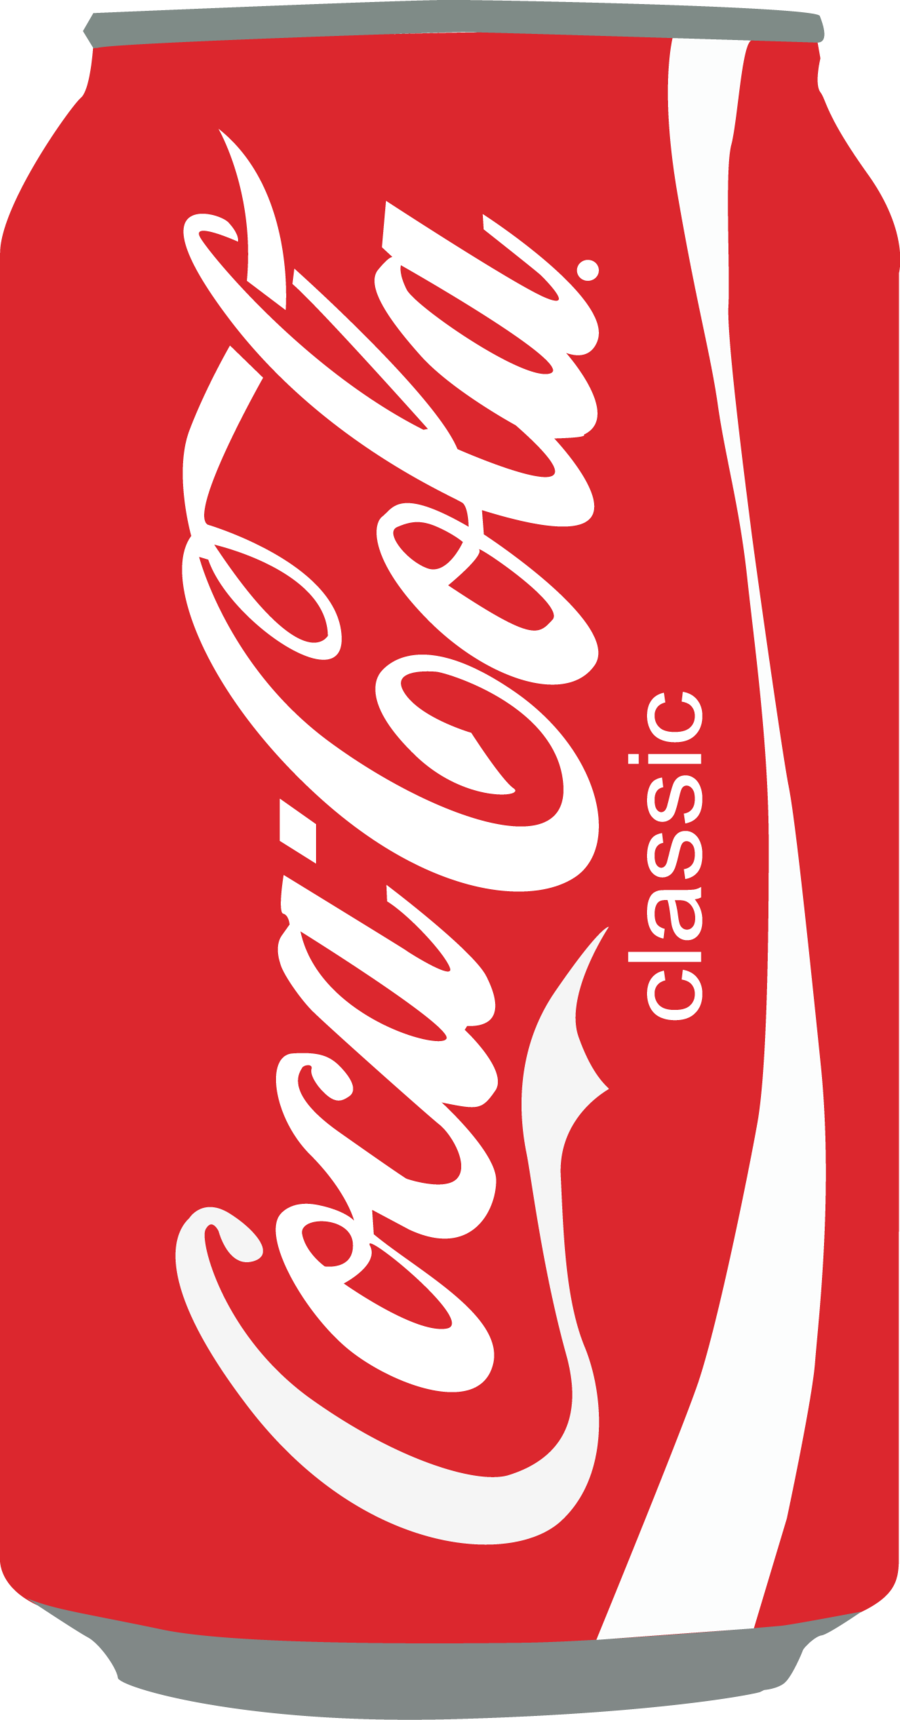 Soda clipart free images image